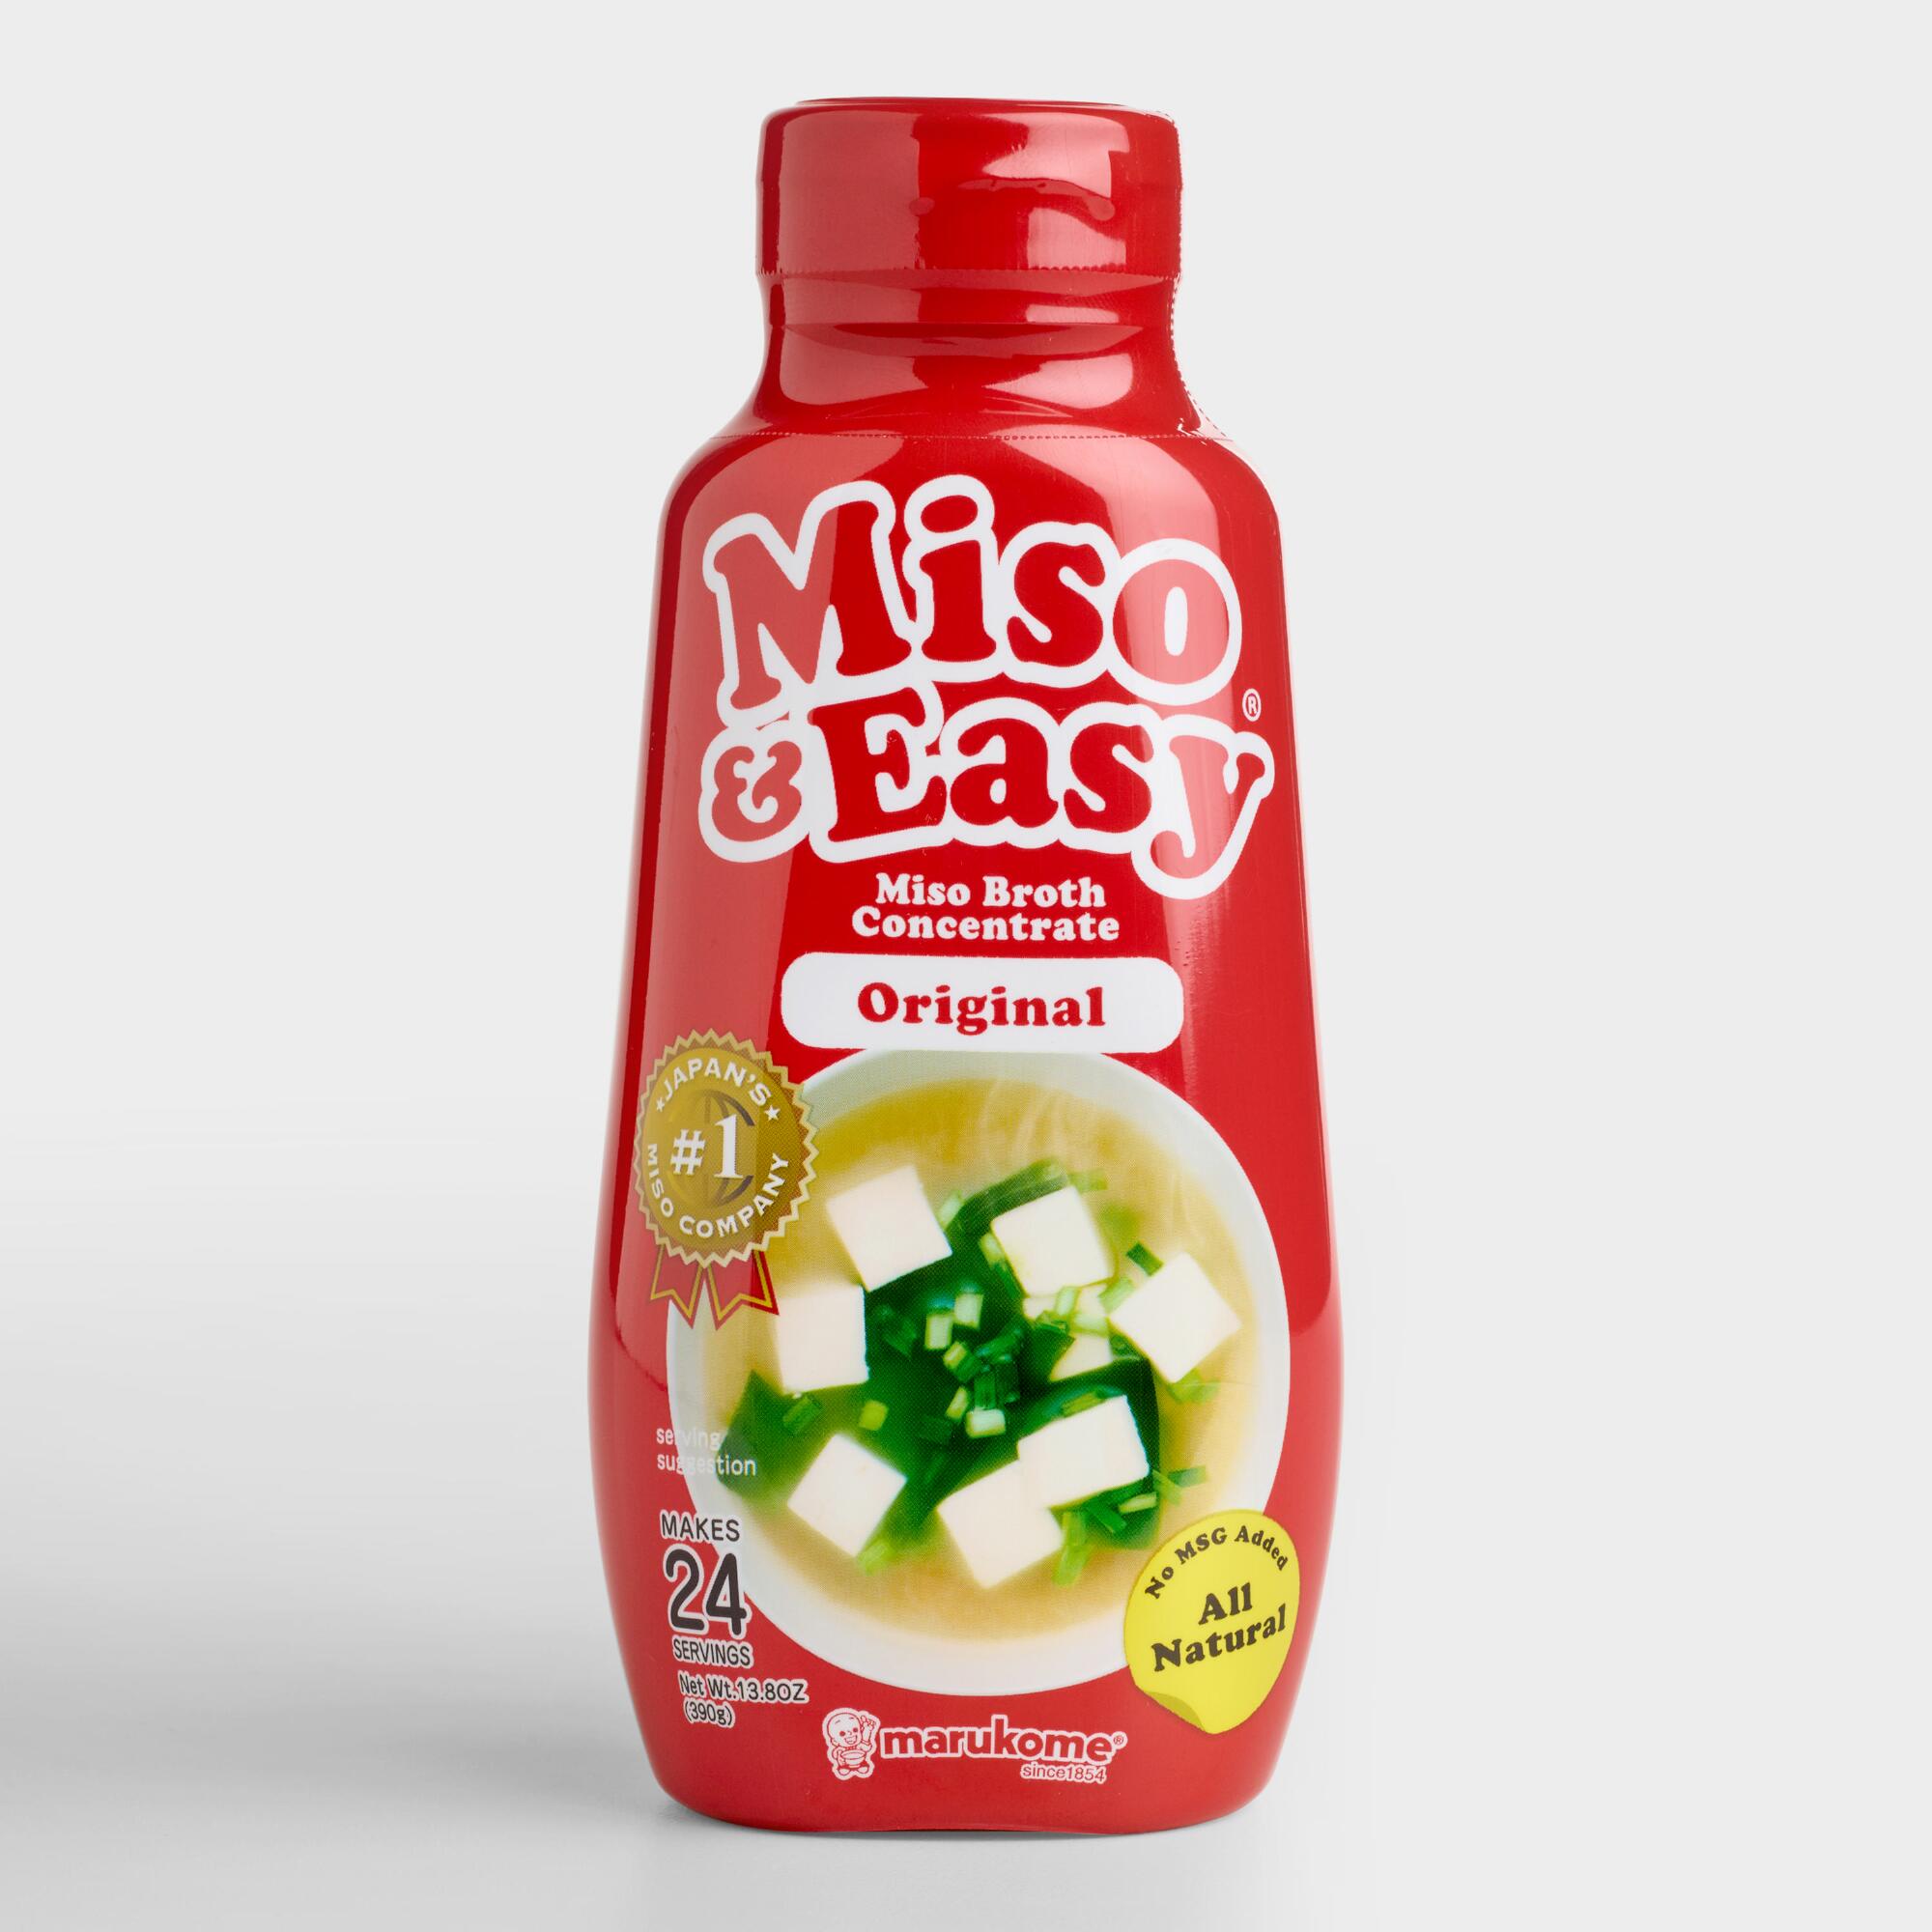 Miso and Easy Original Broth by World Market